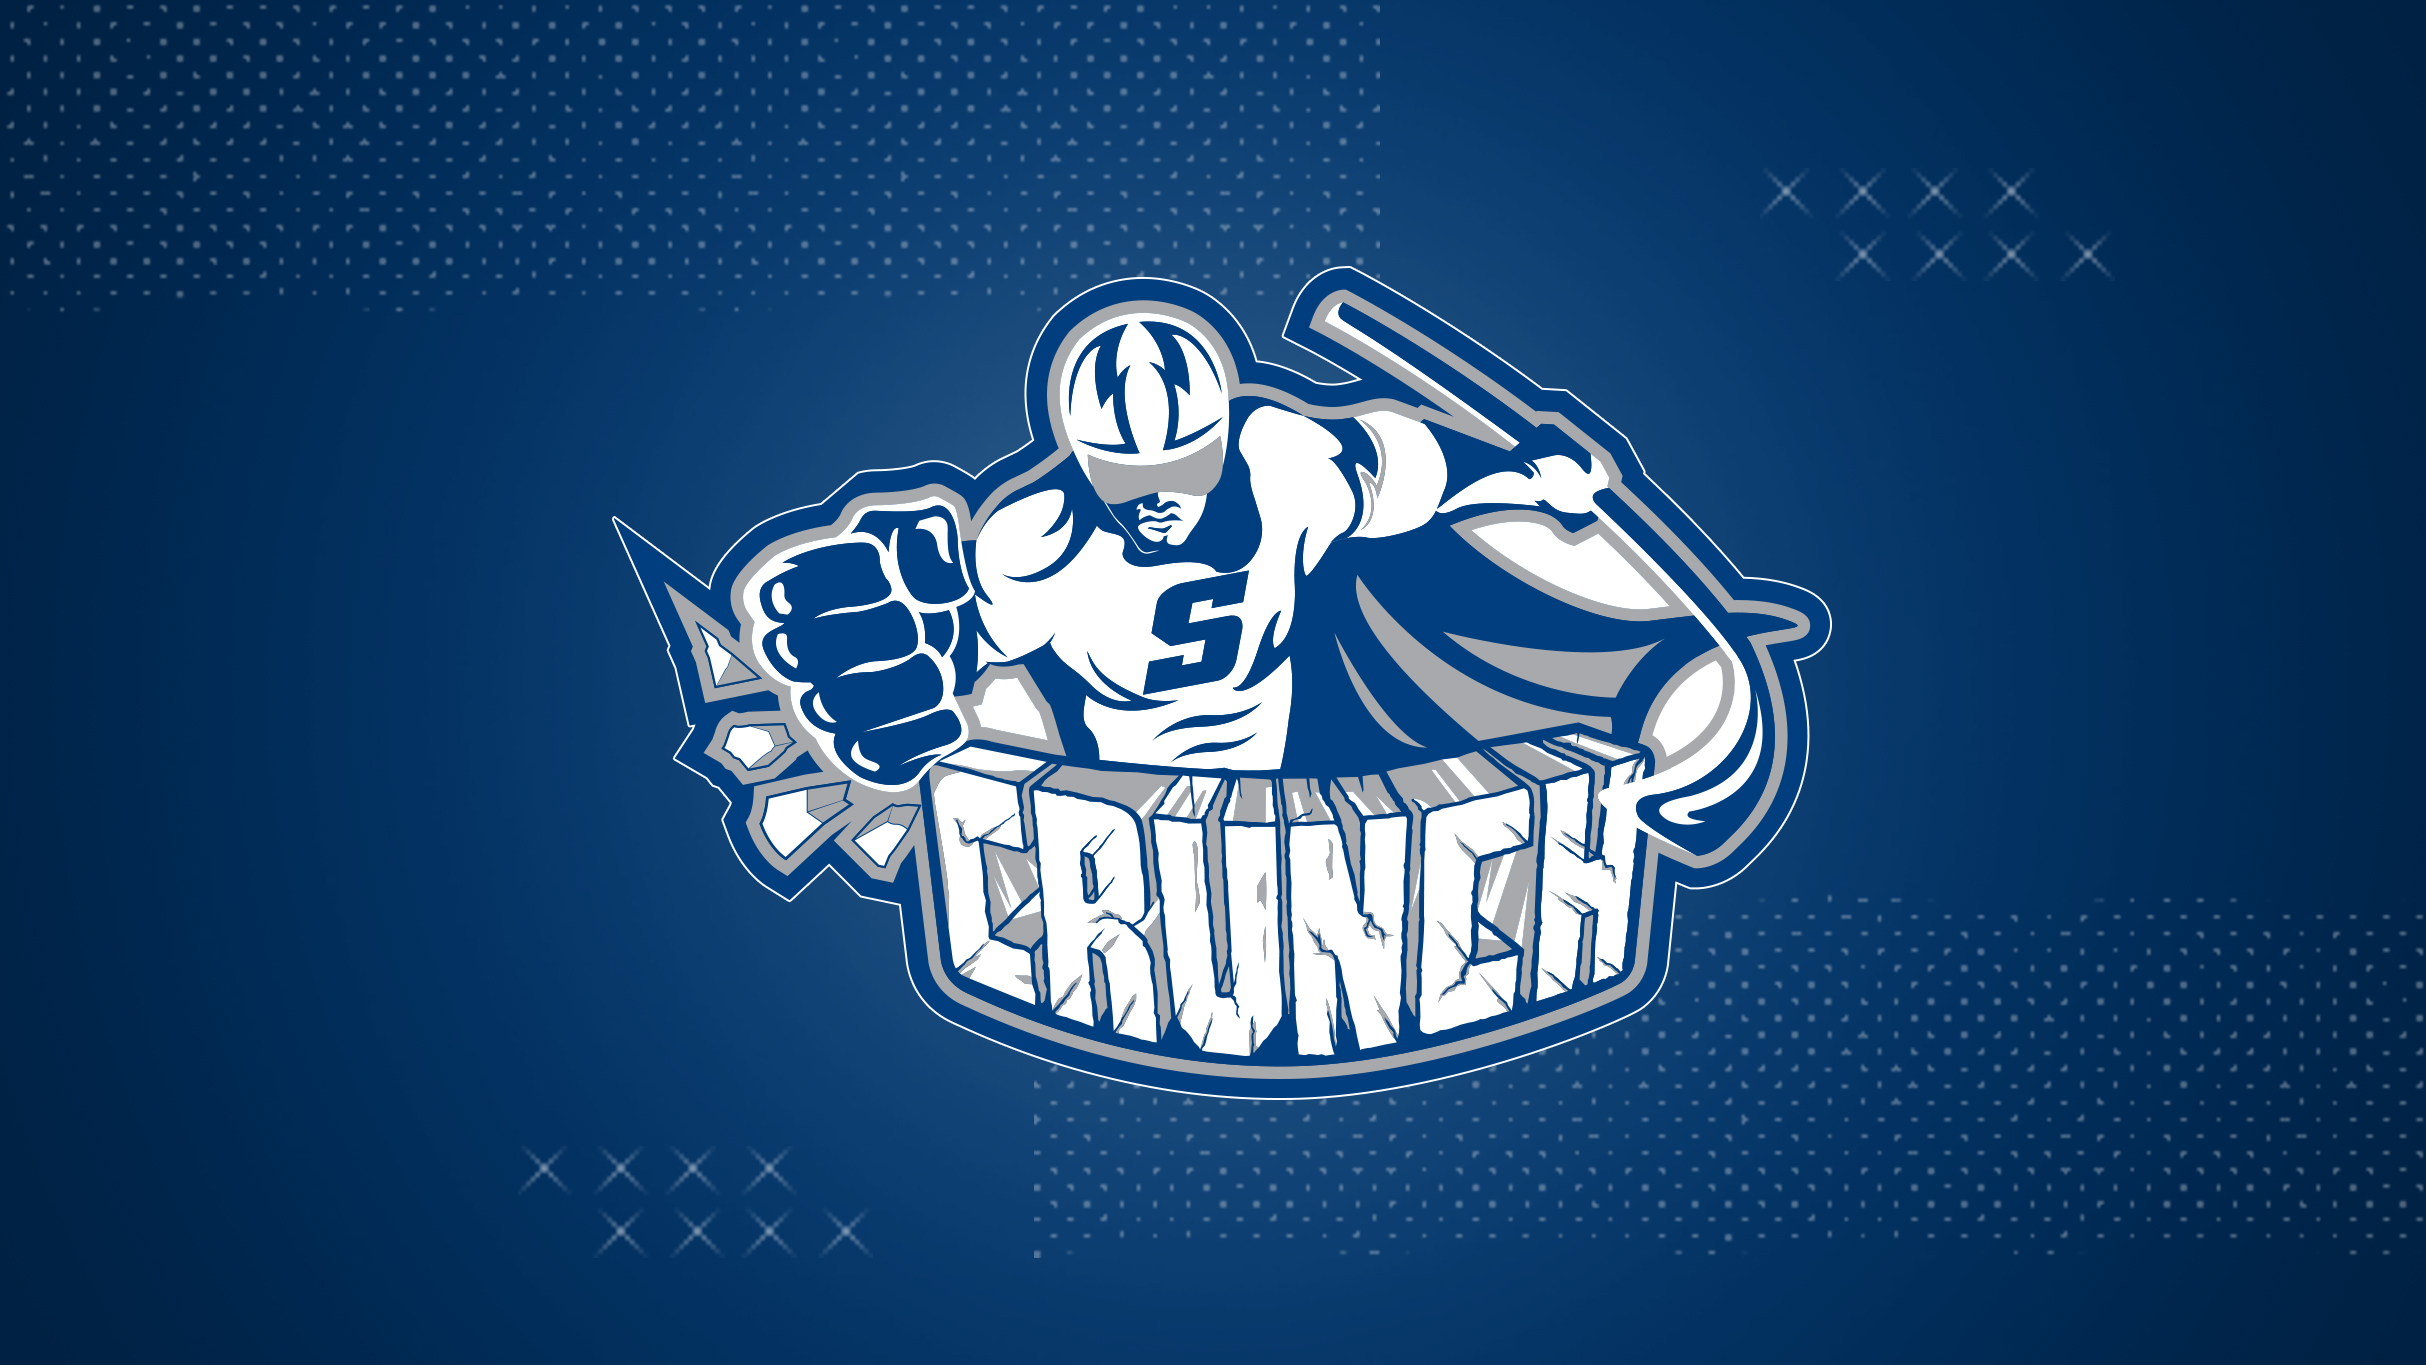 North Division Finals: Syracuse Crunch vs. Cleveland Monsters